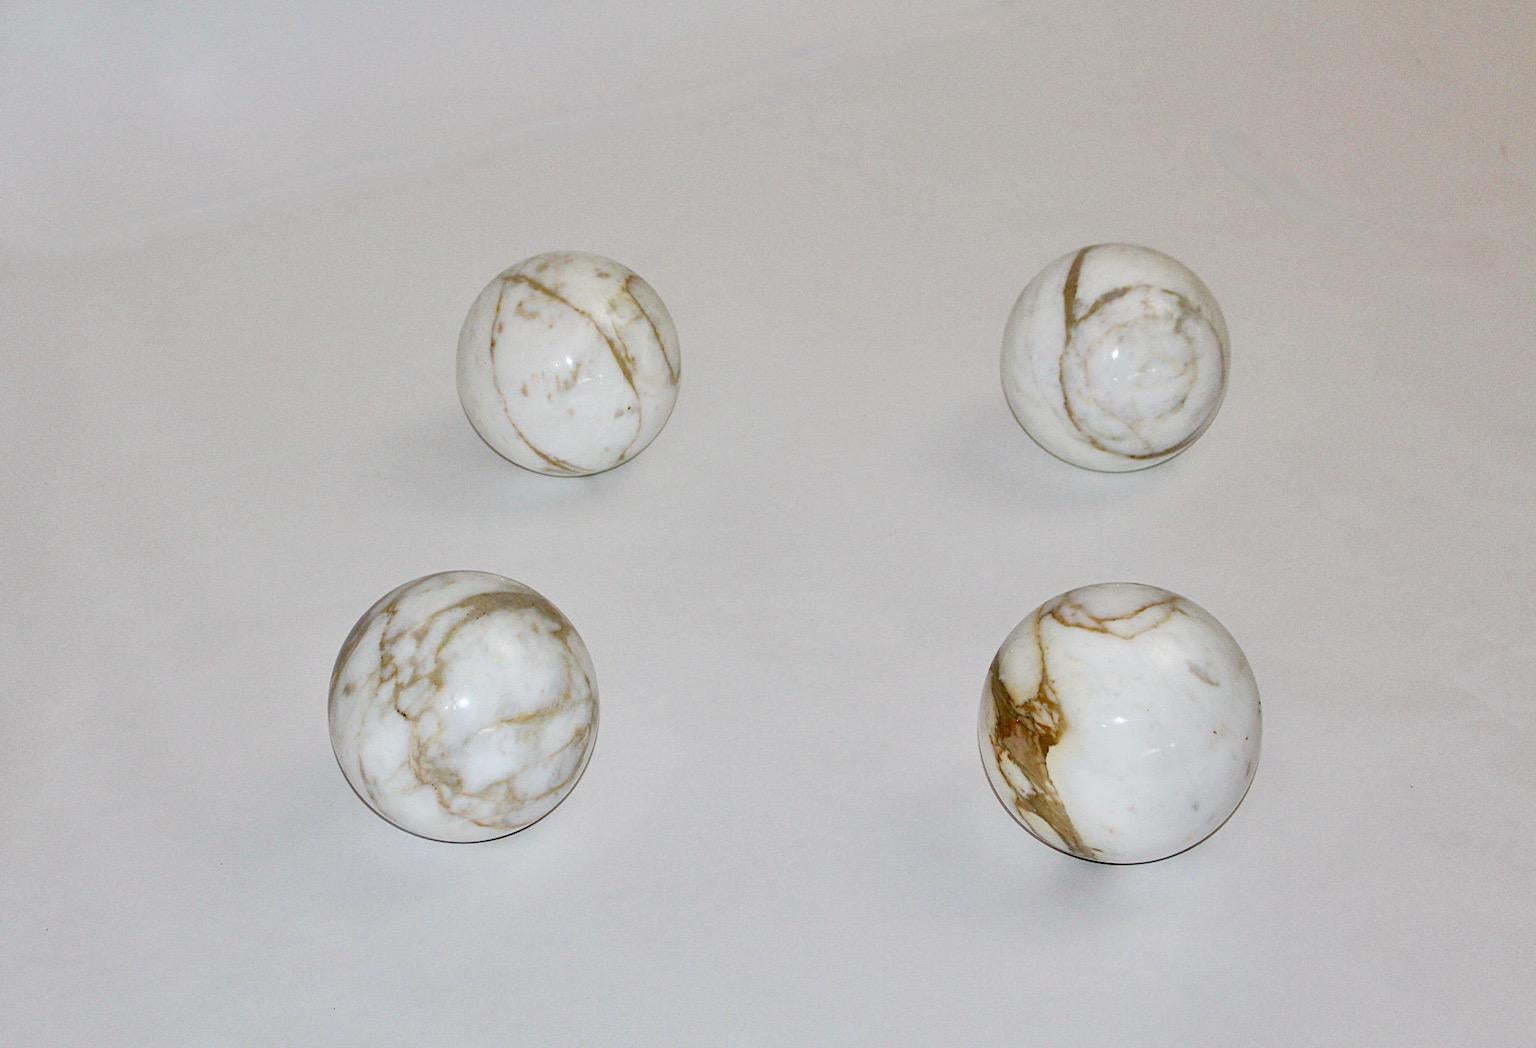 Italian modern set of 4 vintage white marble bullets peppered with light brown sprinkles designed and manufactured in Italy 1970s.
The beautiful color in soft tones provides a gorgeous decor in your interior or patio space.
Very good condition, no